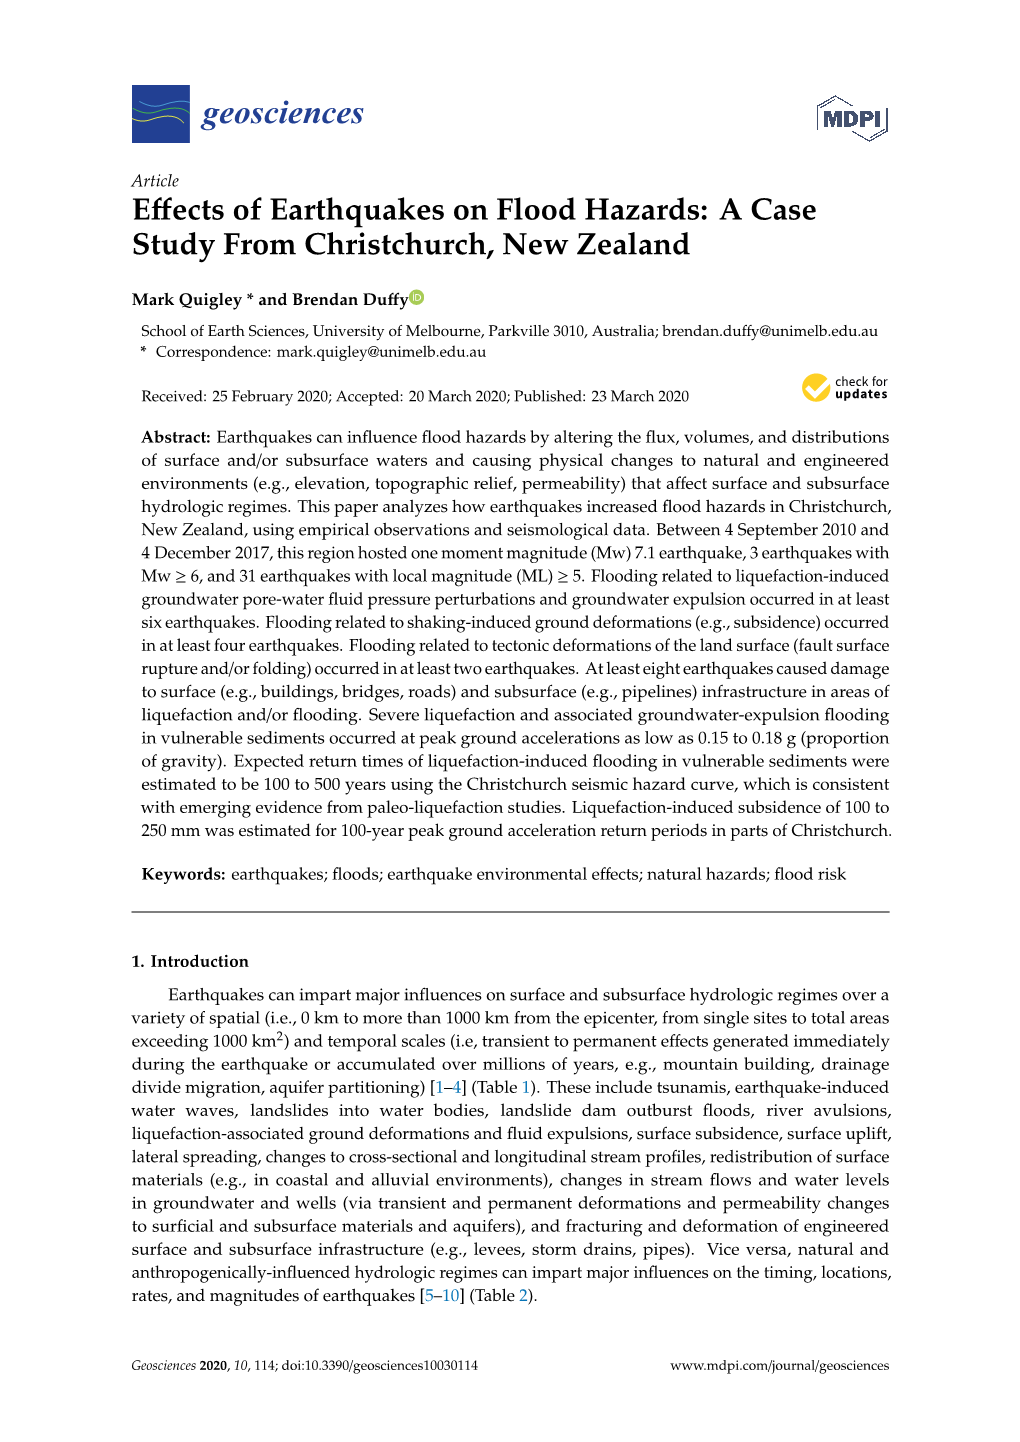 Effects of Earthquakes on Flood Hazards: a Case Study from Christchurch, New Zealand